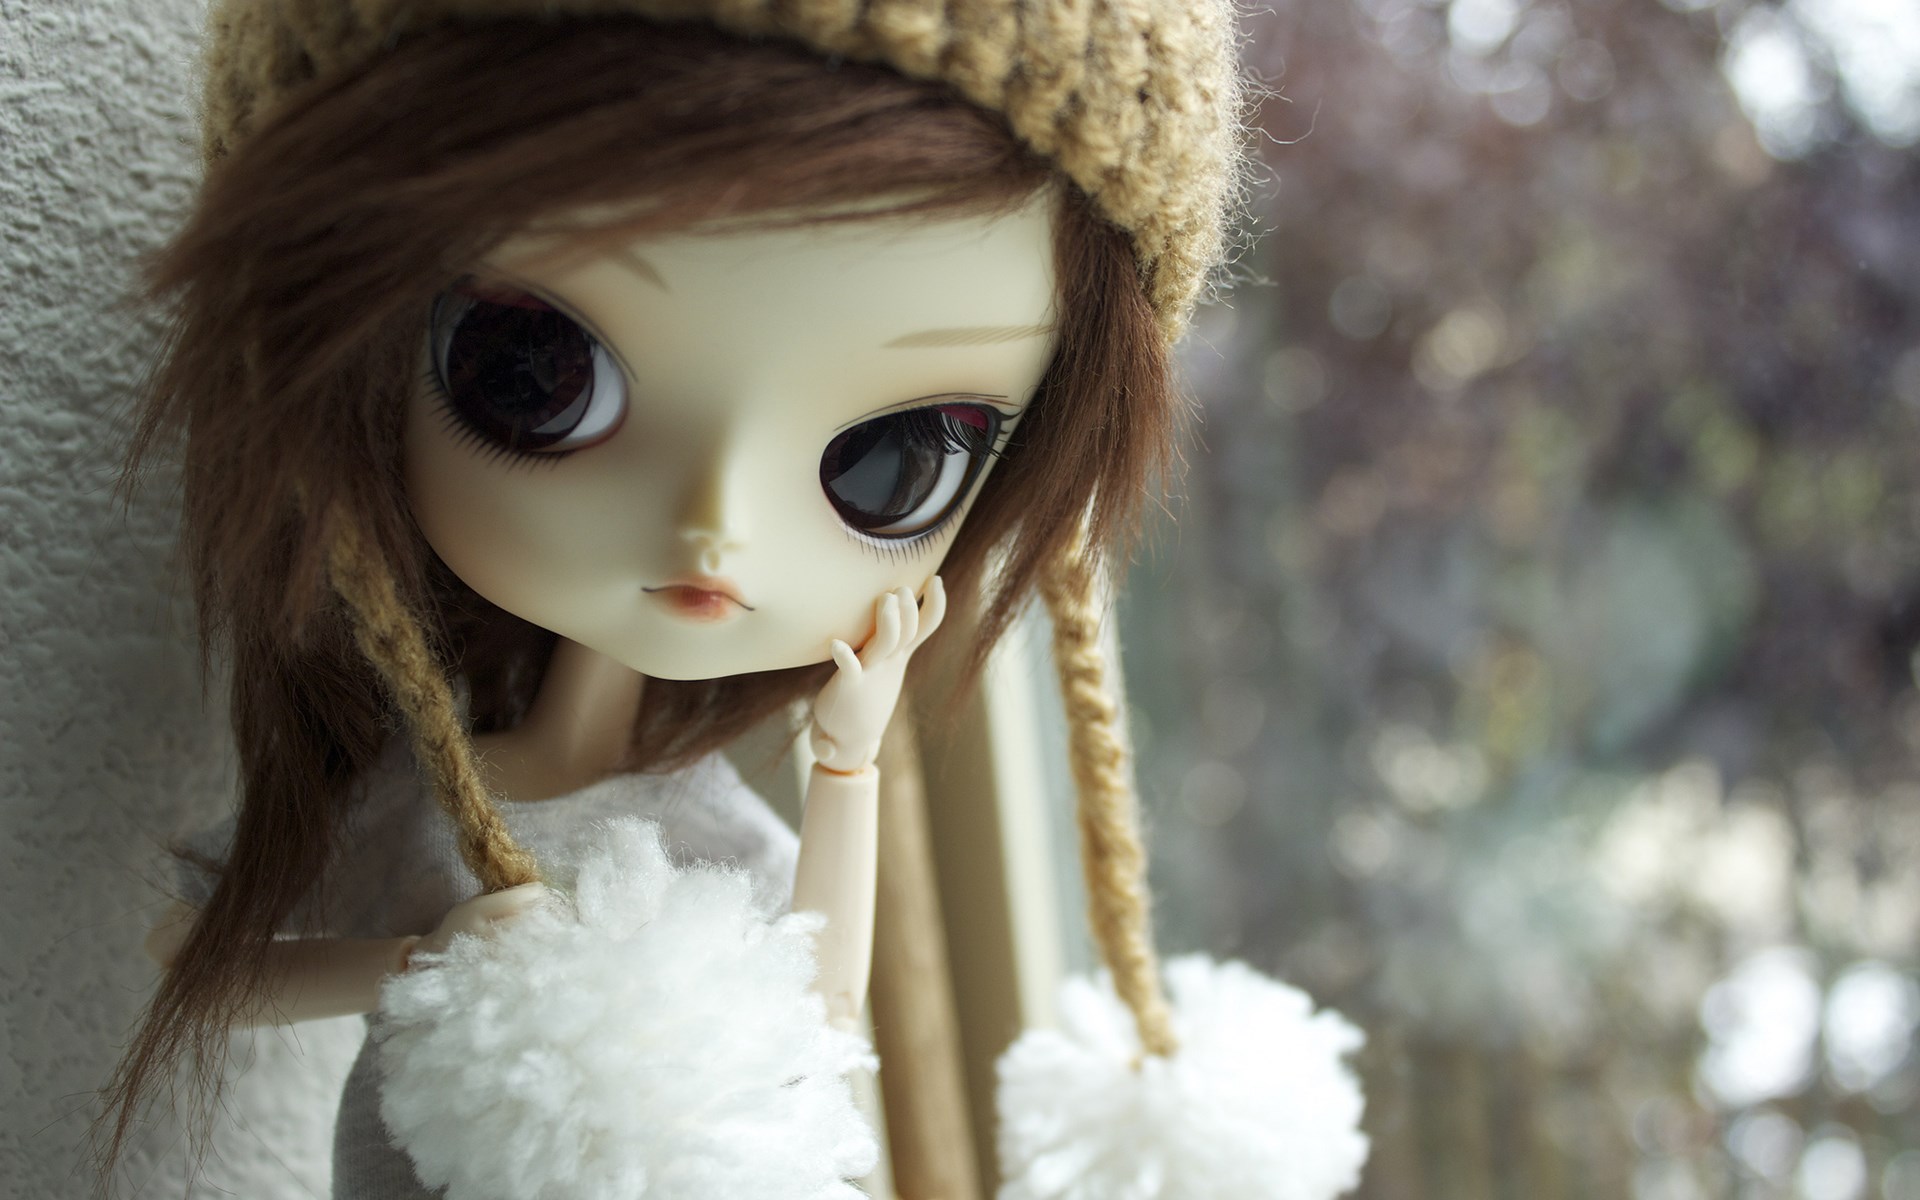 Gorgeous Toy Doll Wallpaper - Doll Hd Wallpapers 1080p - HD Wallpaper 